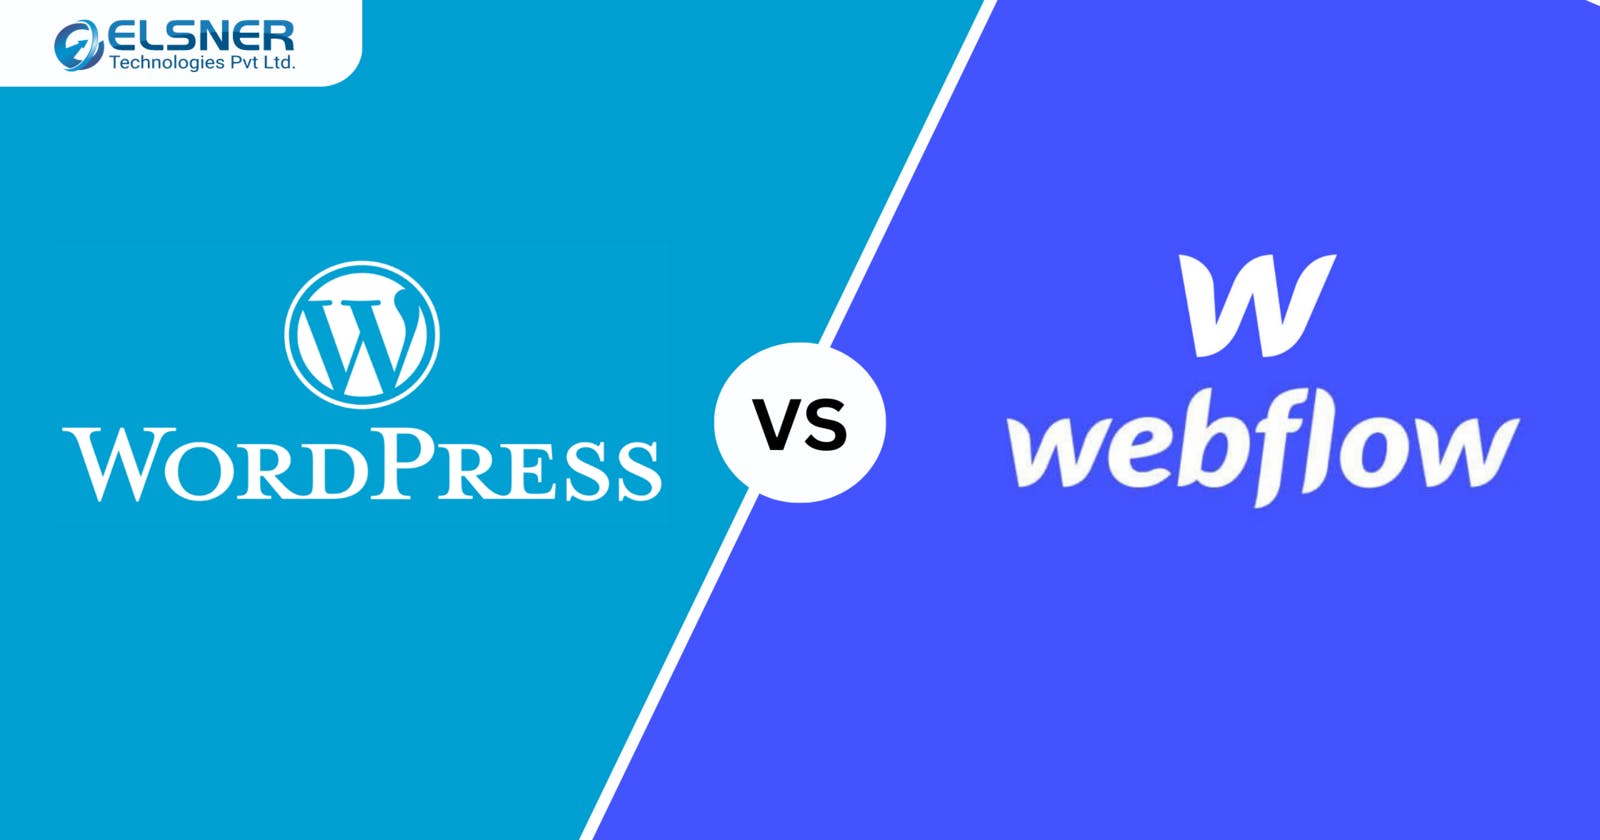 Which Platform Is Better for Your Website: WordPress or WebFlow?